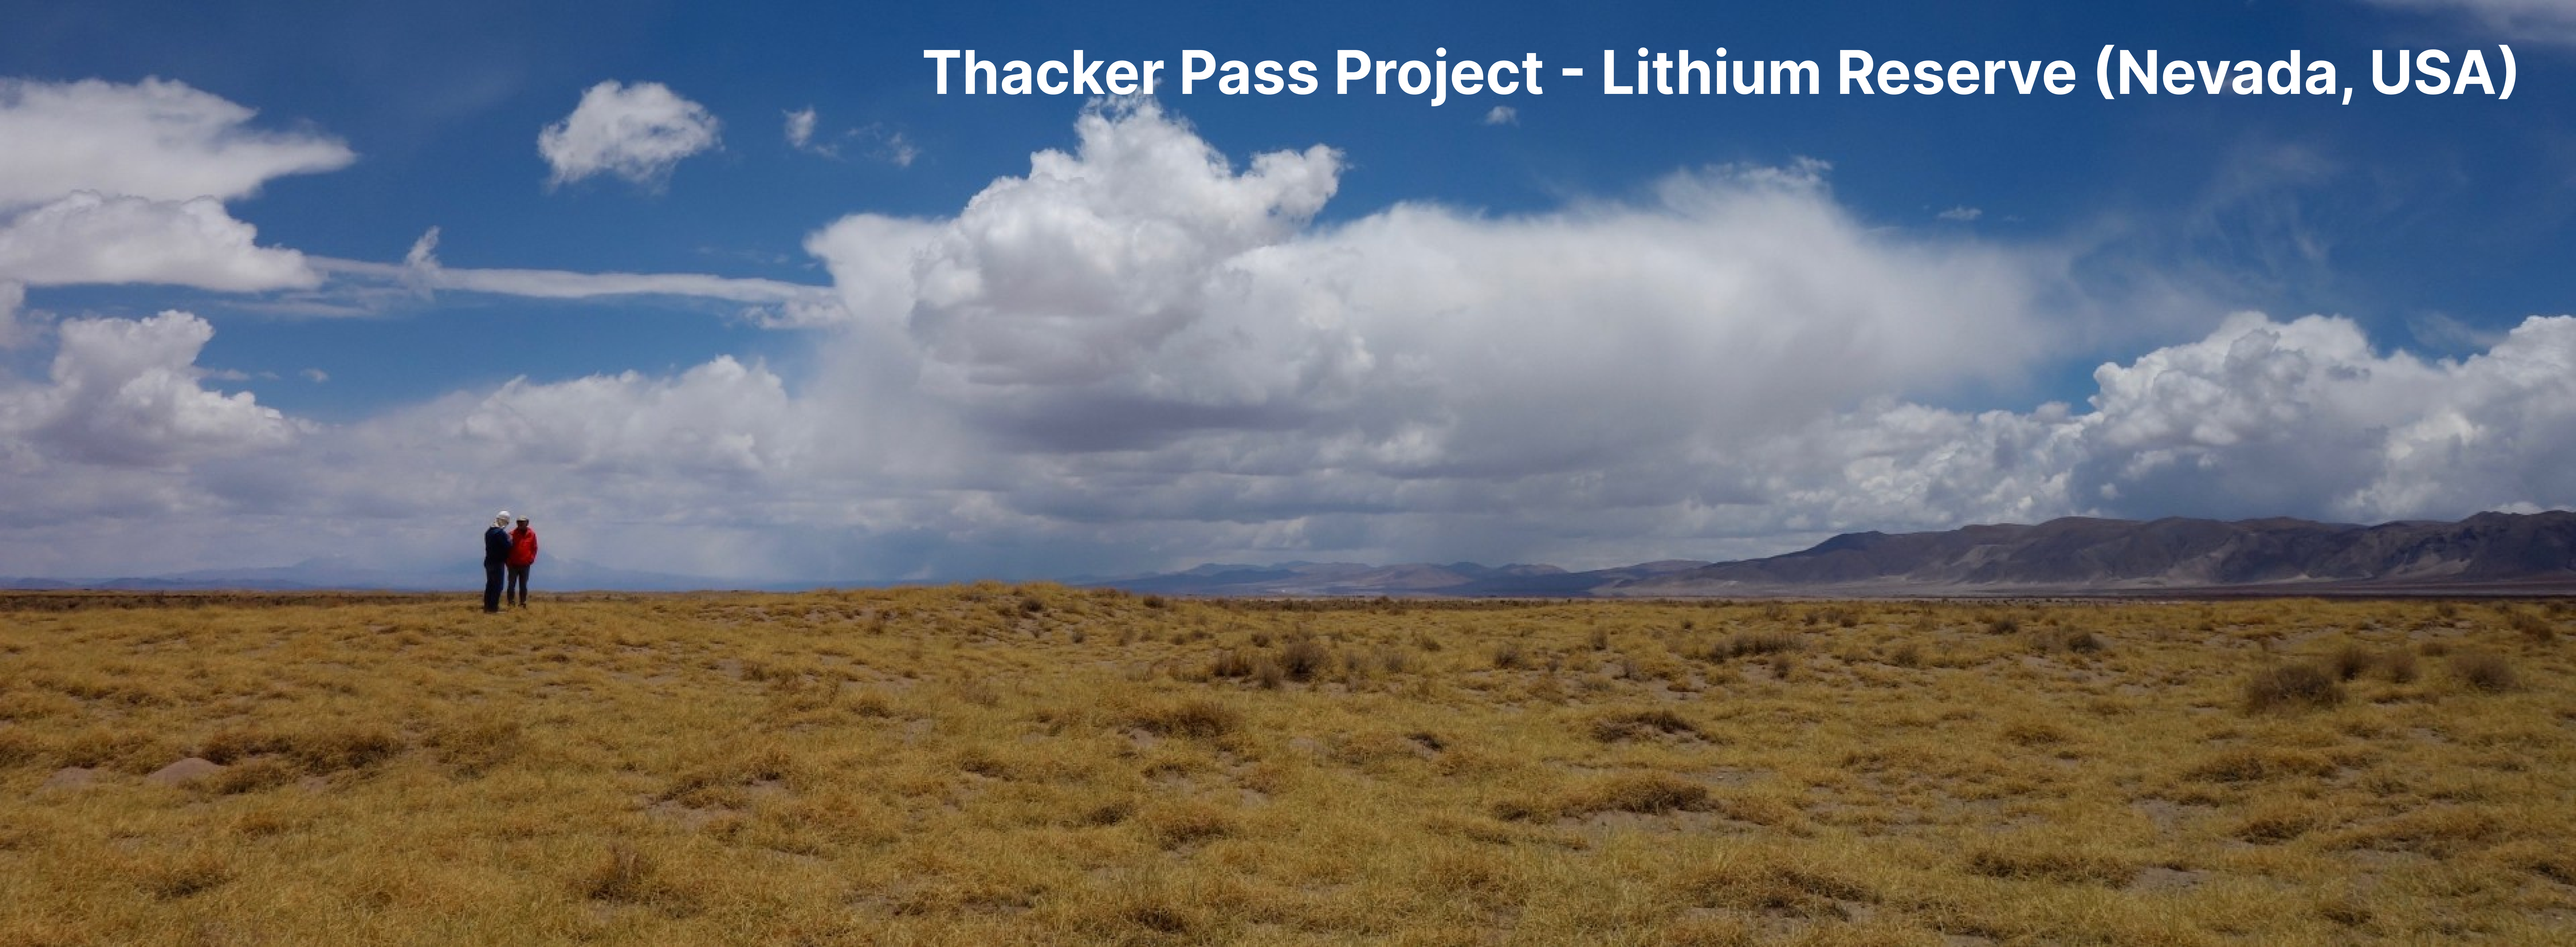 Press Release: Aquatech Awarded Contract For Lithium Refining Process At Lithium Americas Thacker Pass Project